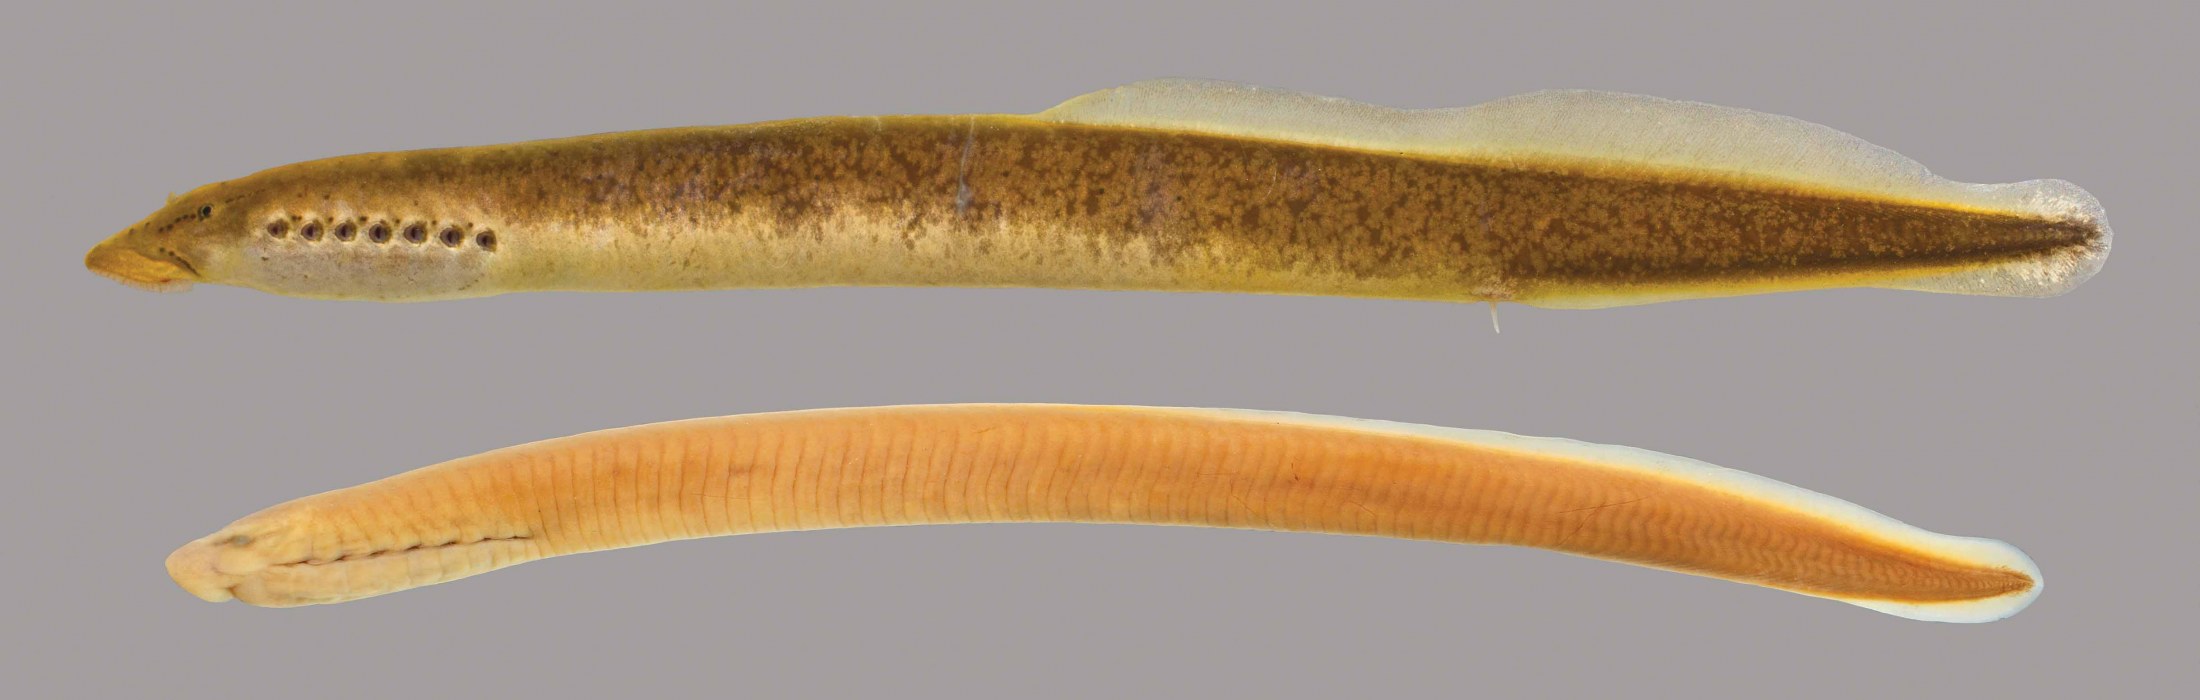 Lateral view of Southern Brook Lampreys